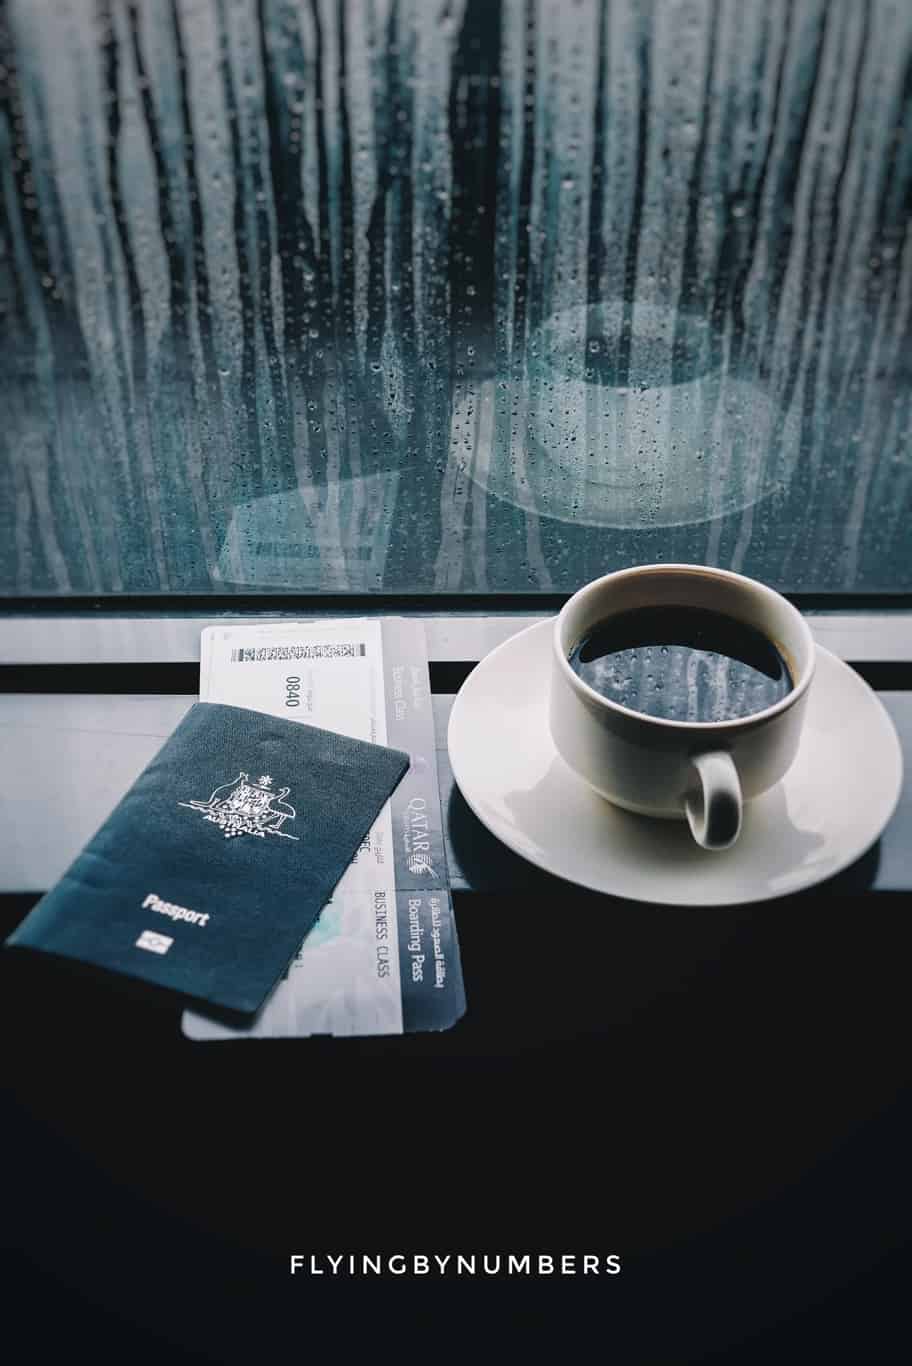 Selling upgrades and discounted staff travel tickets with coffee